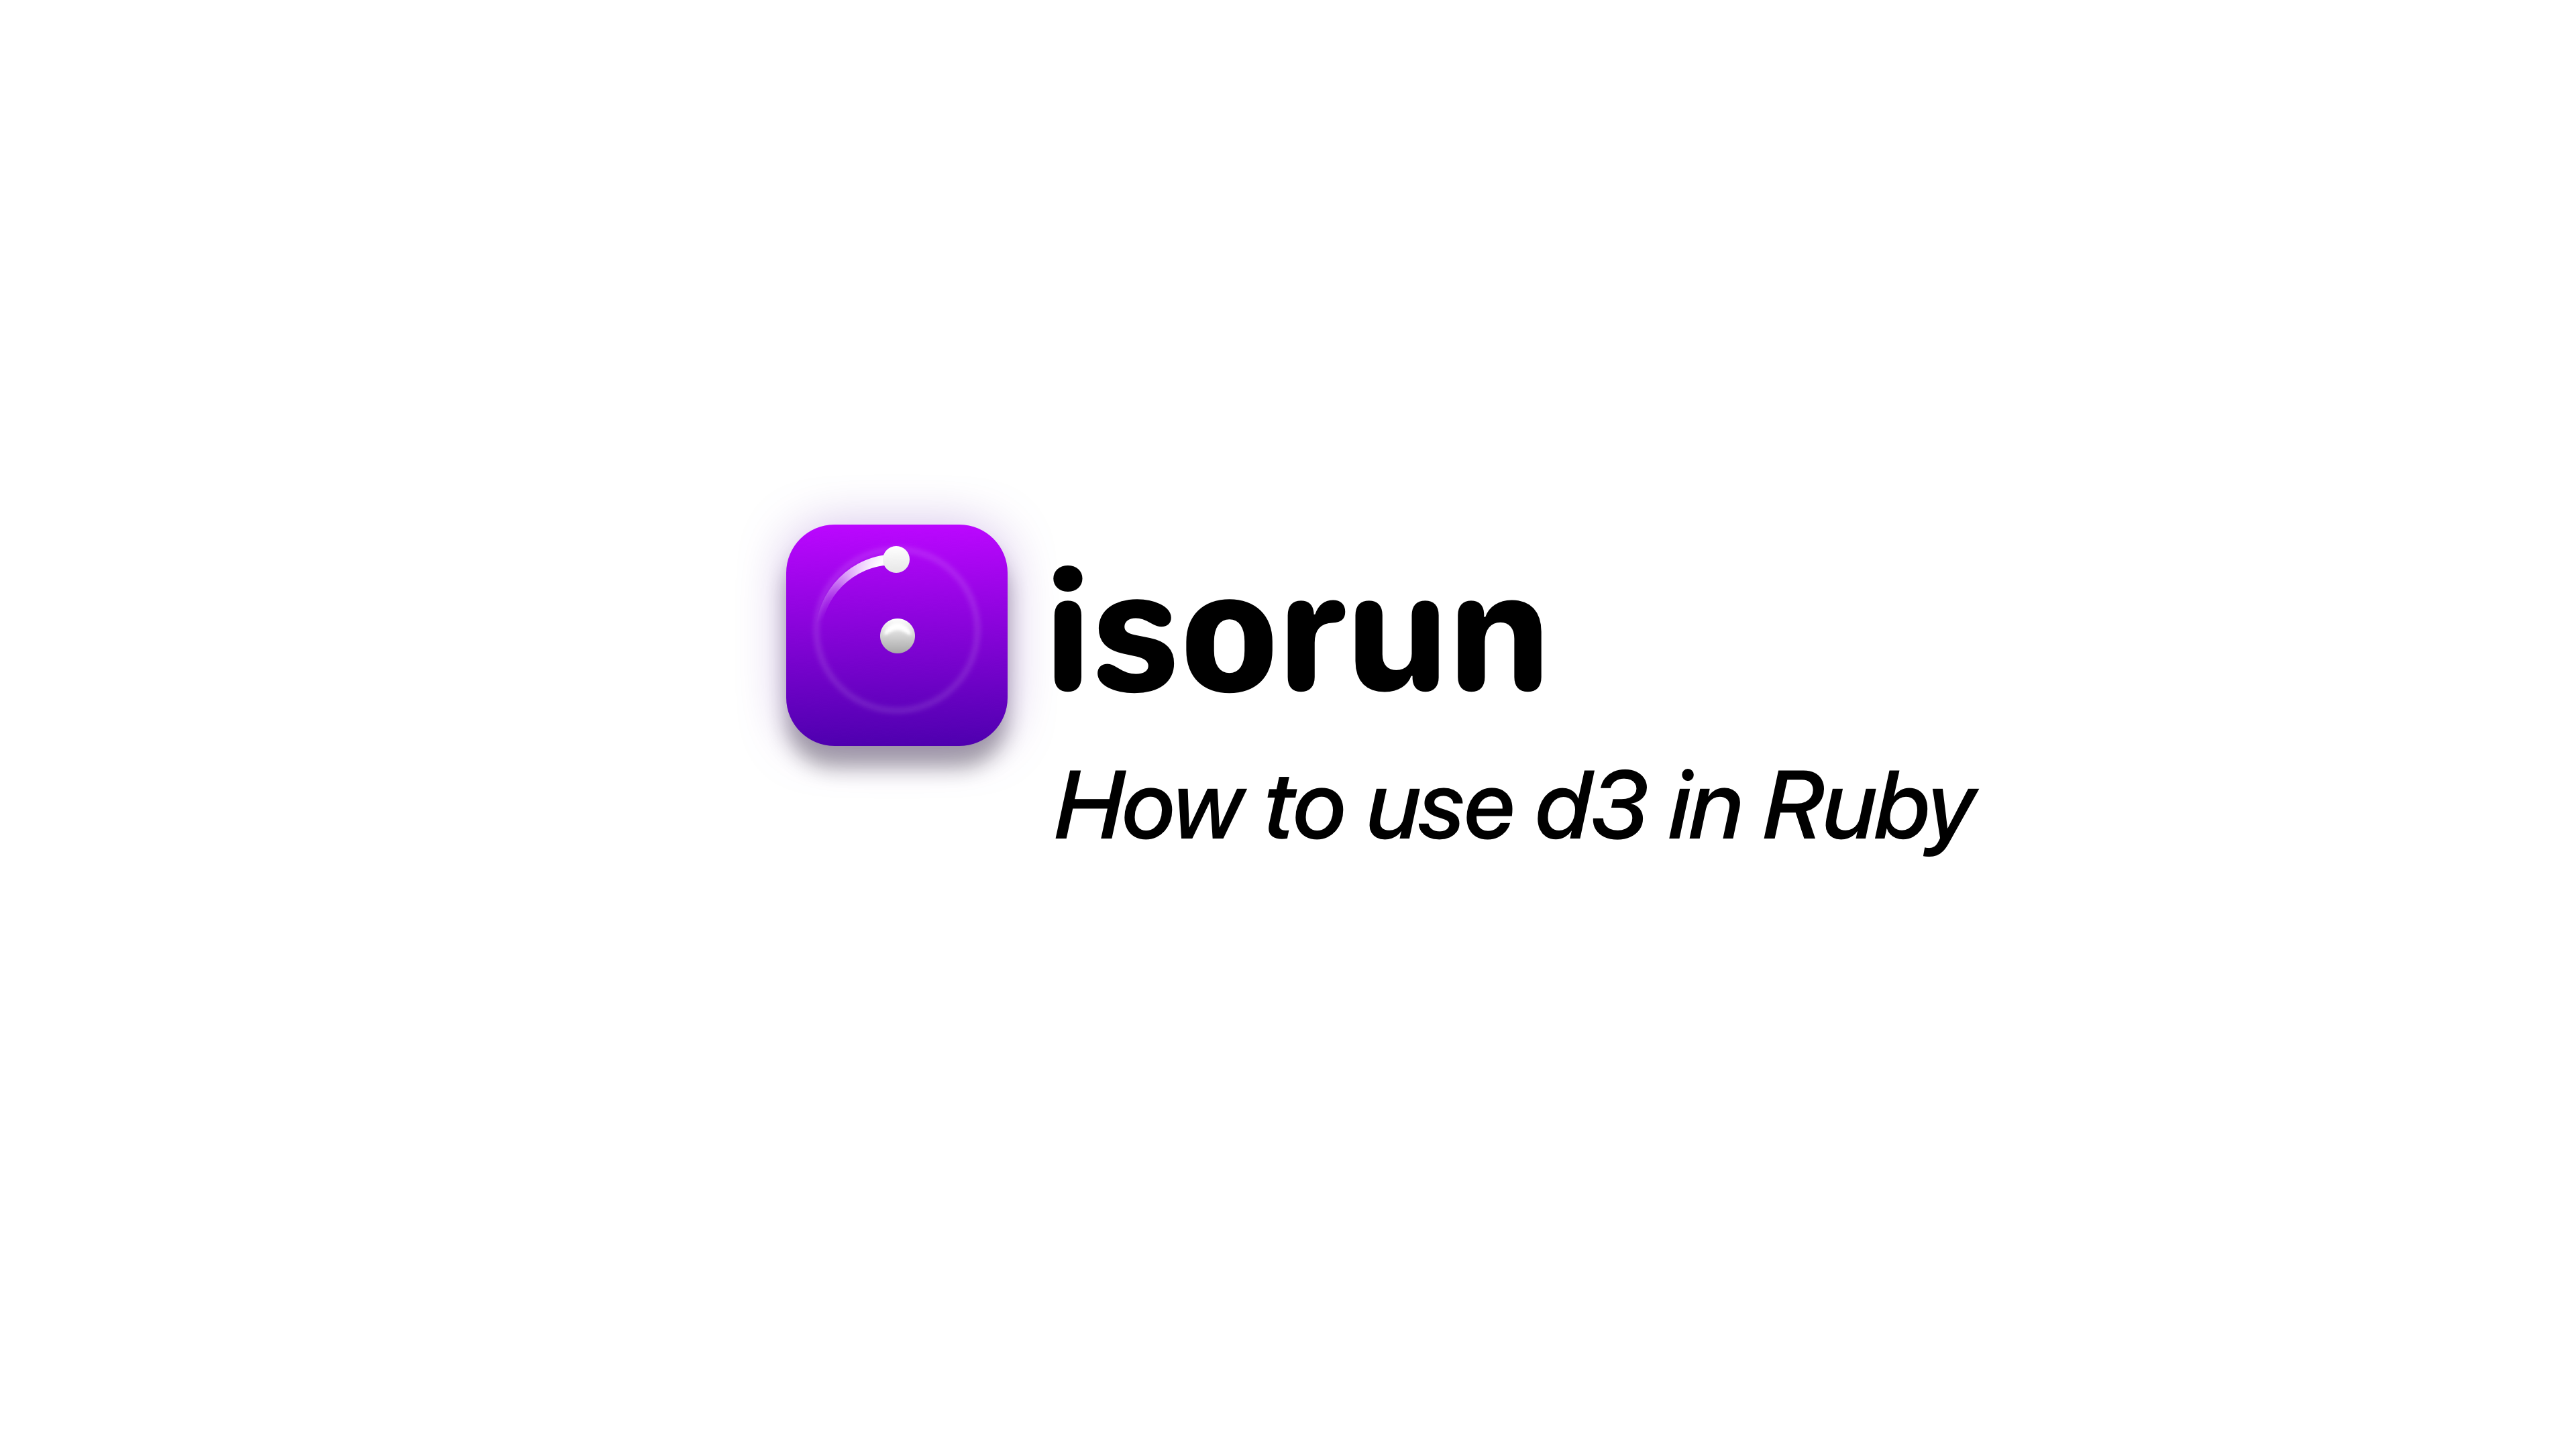 How to use d3 in Ruby